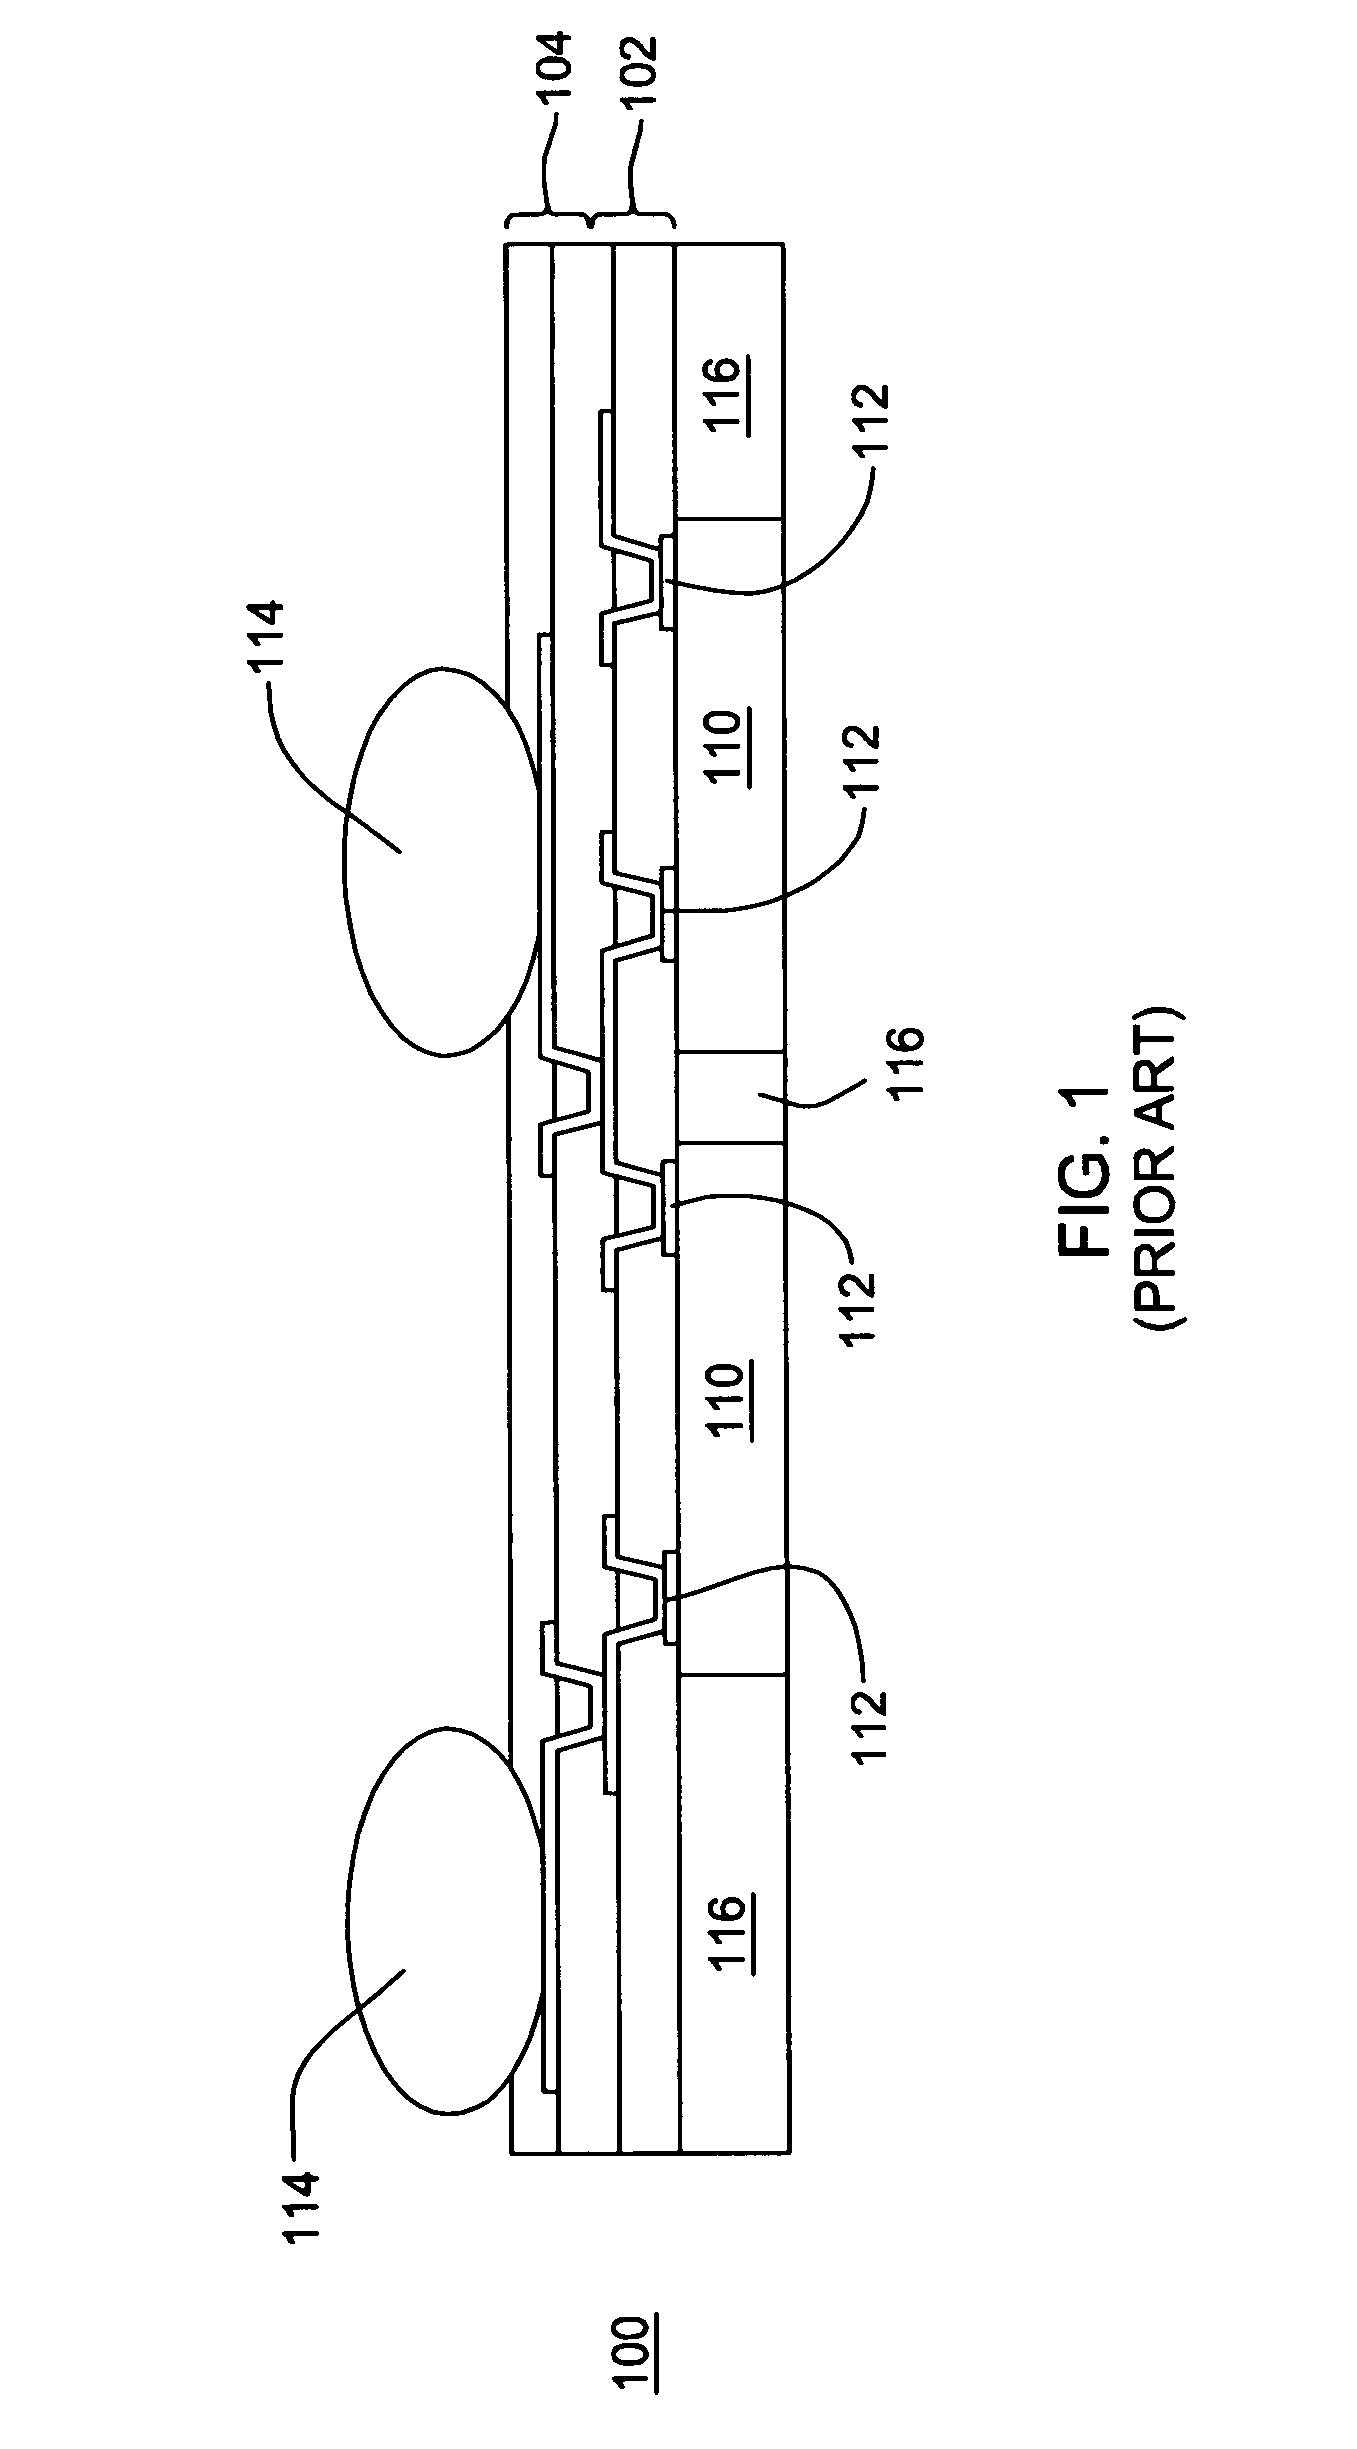 Integrated conductive structures and fabrication methods thereof facilitating implementing a cell phone or other electronic system